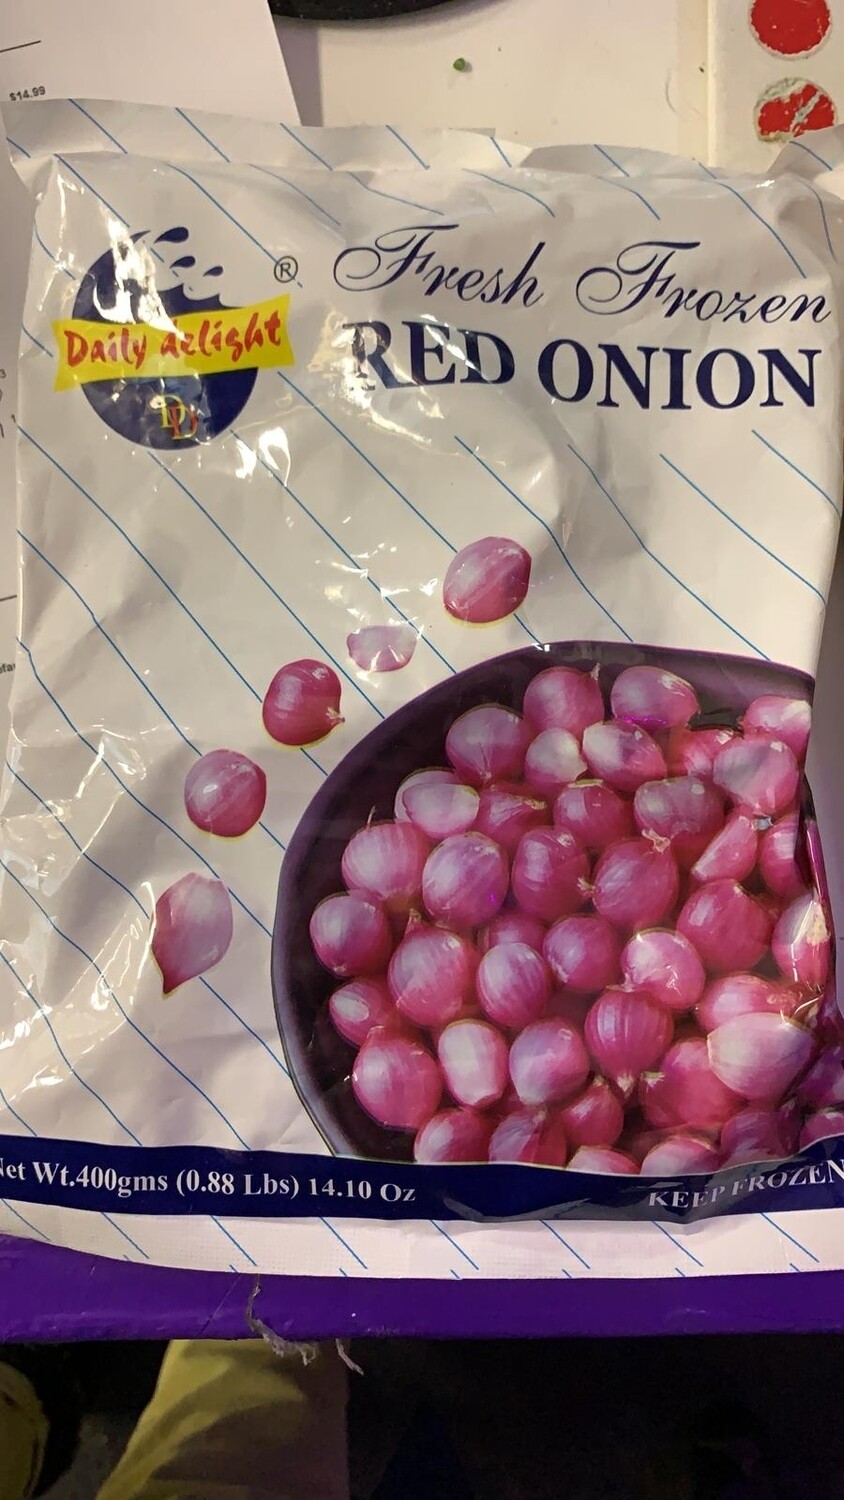 DAILY DELIGHT RED ONION 400 GM